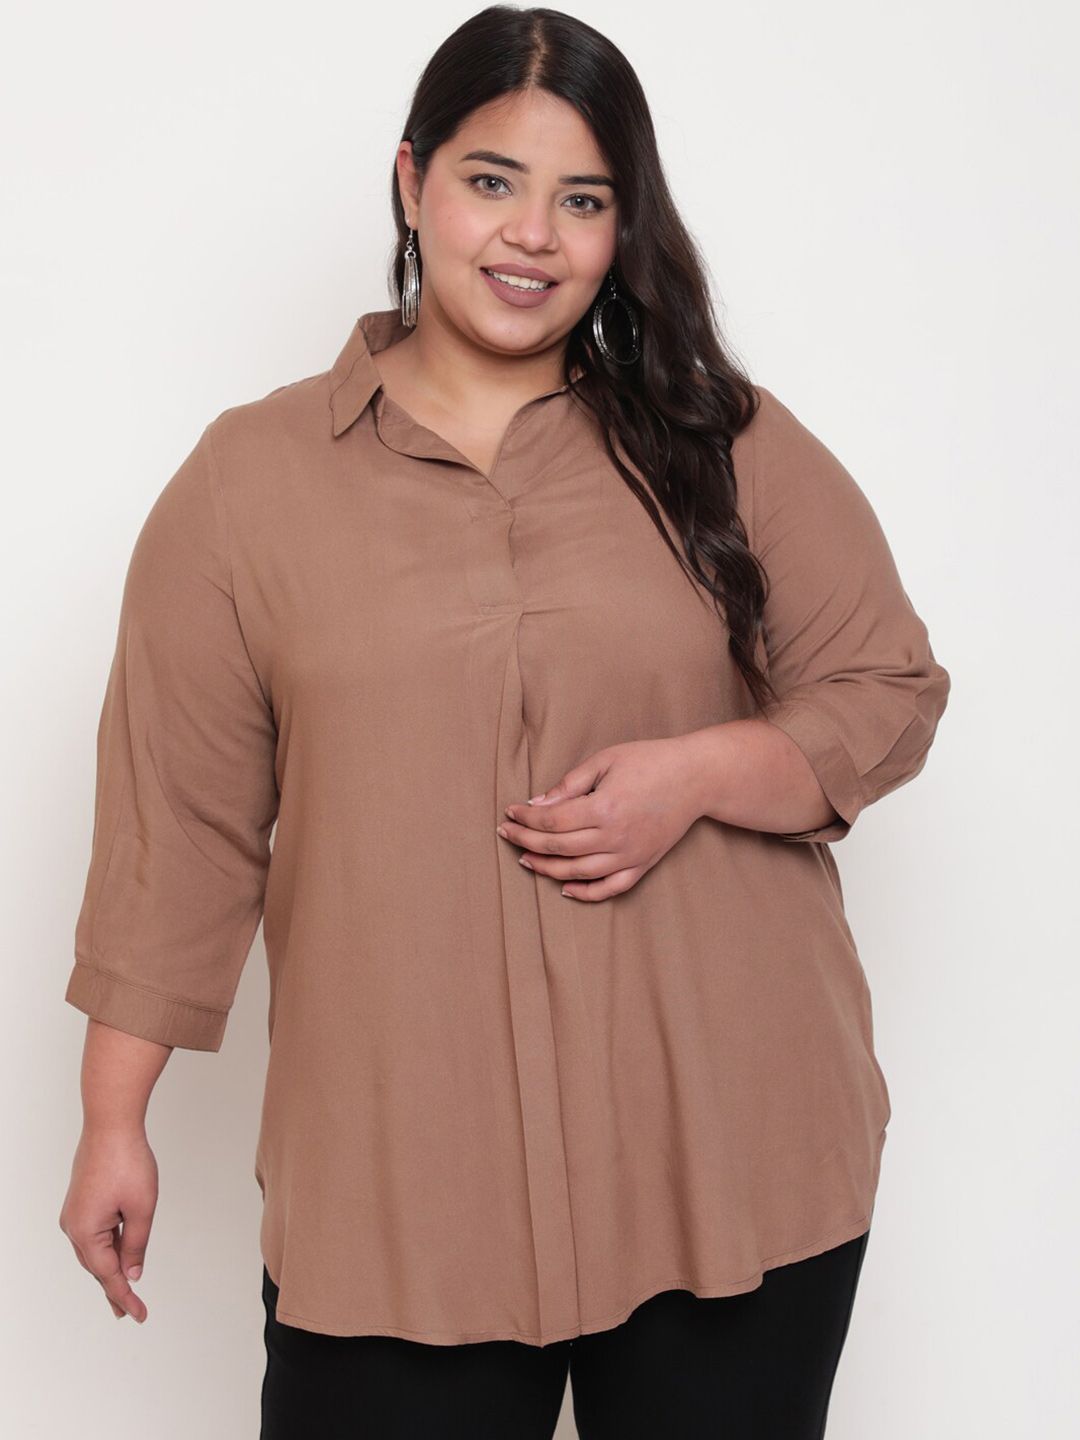 Amydus Plus Size Cuffed Sleeve Shirt Style Top Price in India